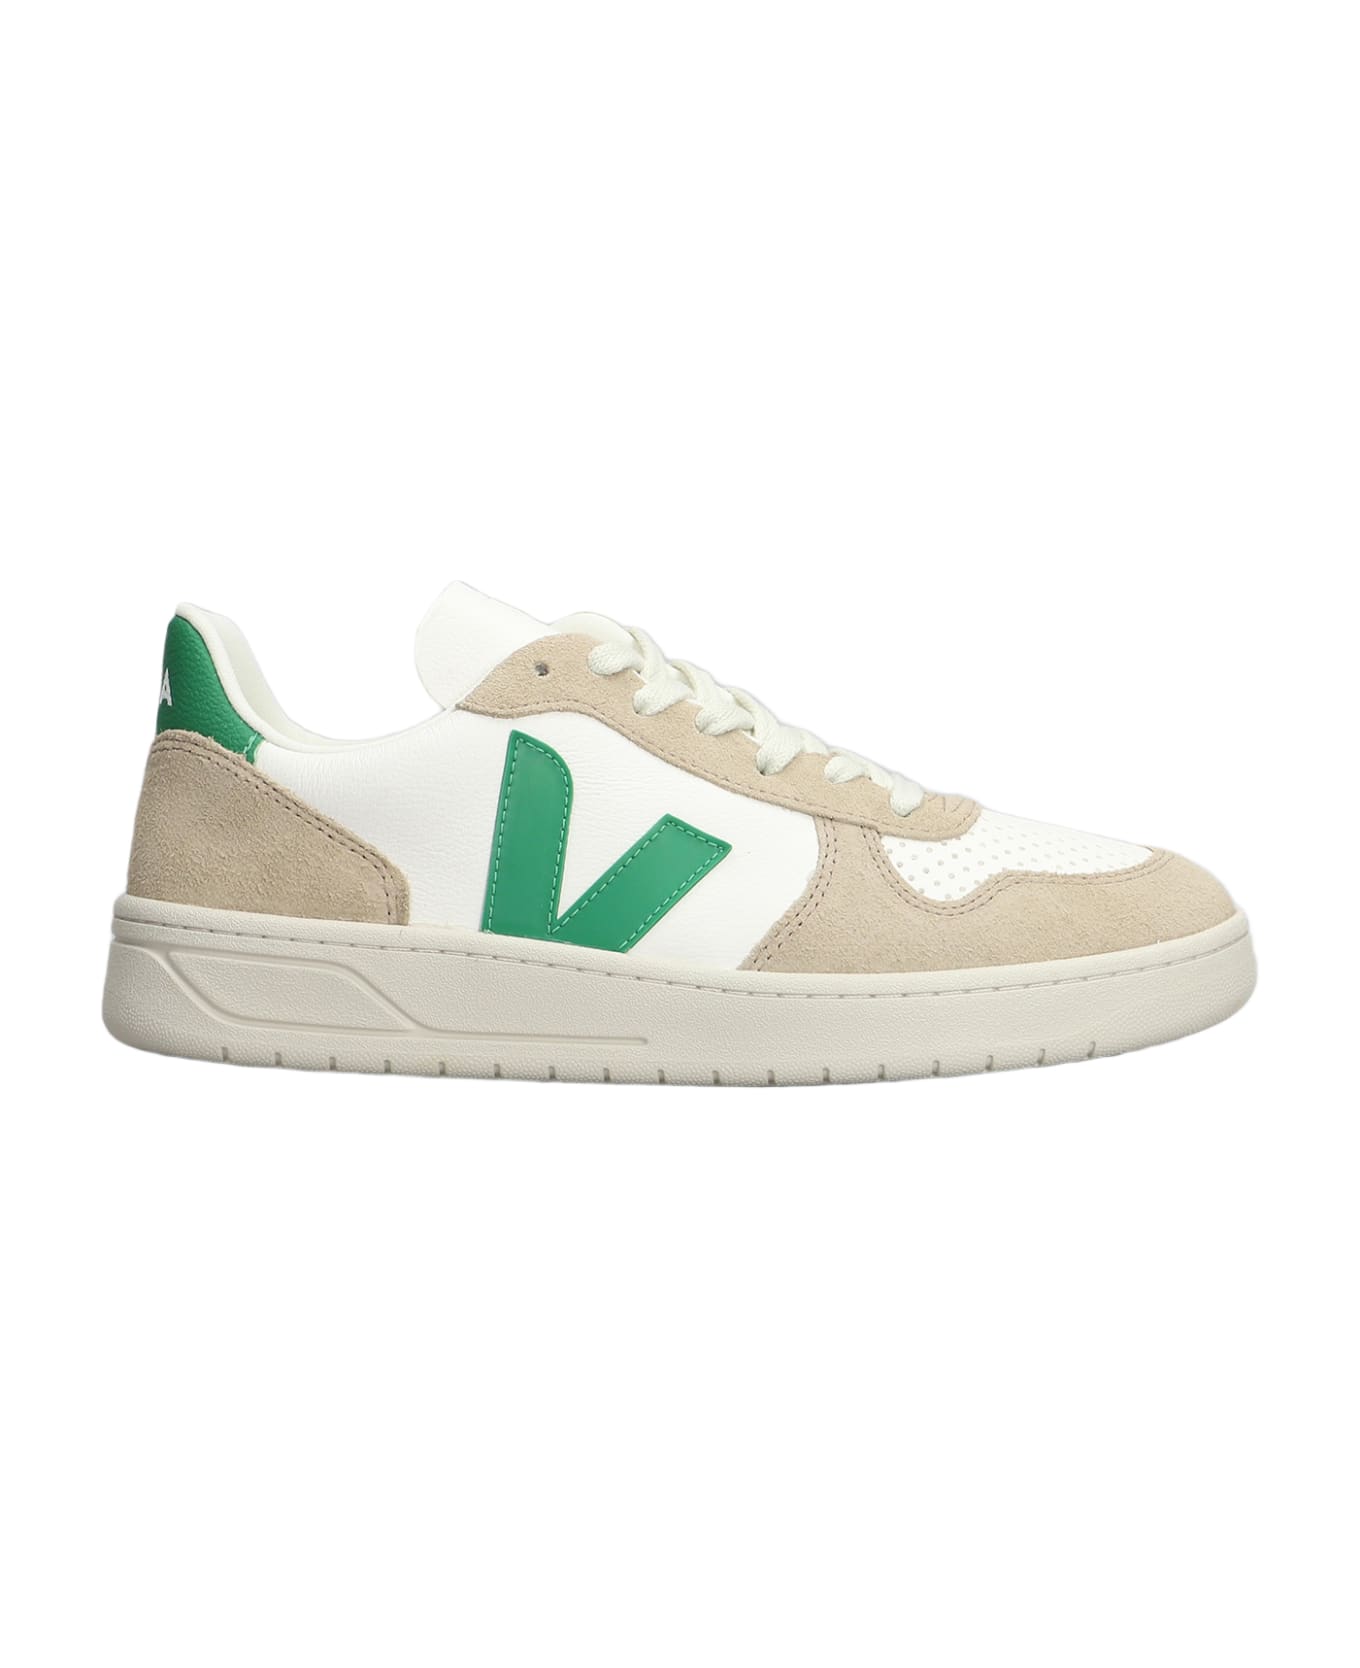 Veja V-10 Sneakers In White Suede And Leather - white スニーカー